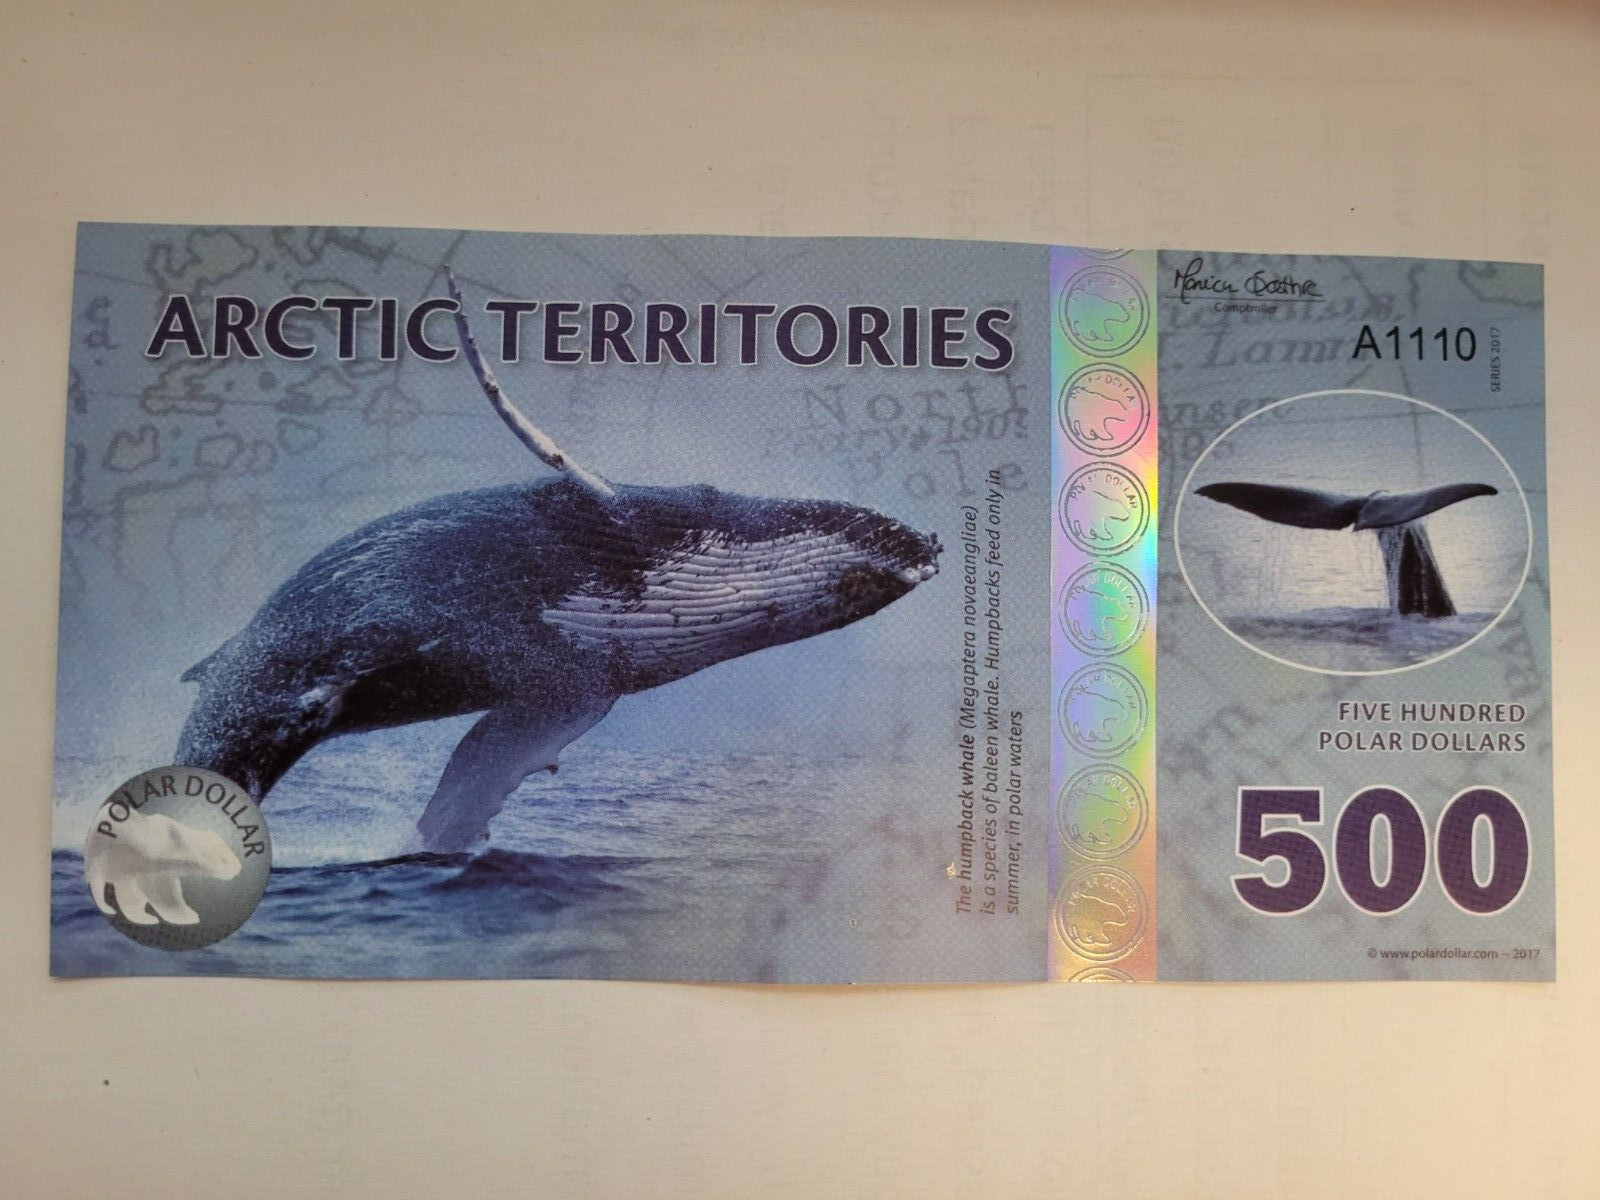 2017 Artic Territories $500 Dollars The Humpback Whale Note